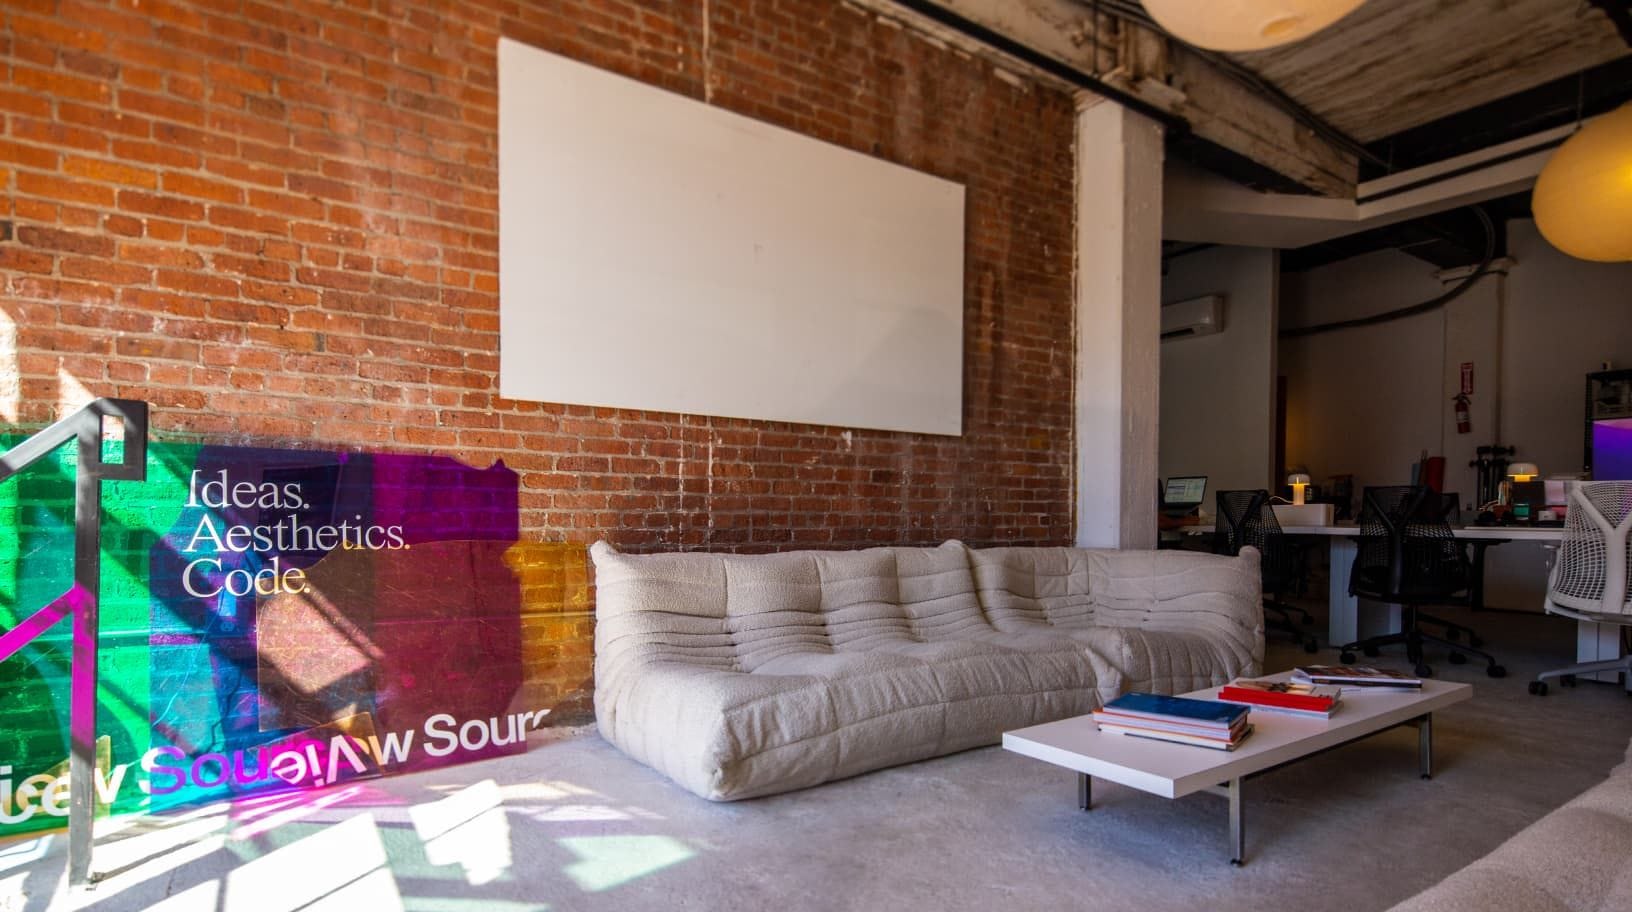 View Source Design Studio New York City Greepoint Brooklyn Office Lobby Couch